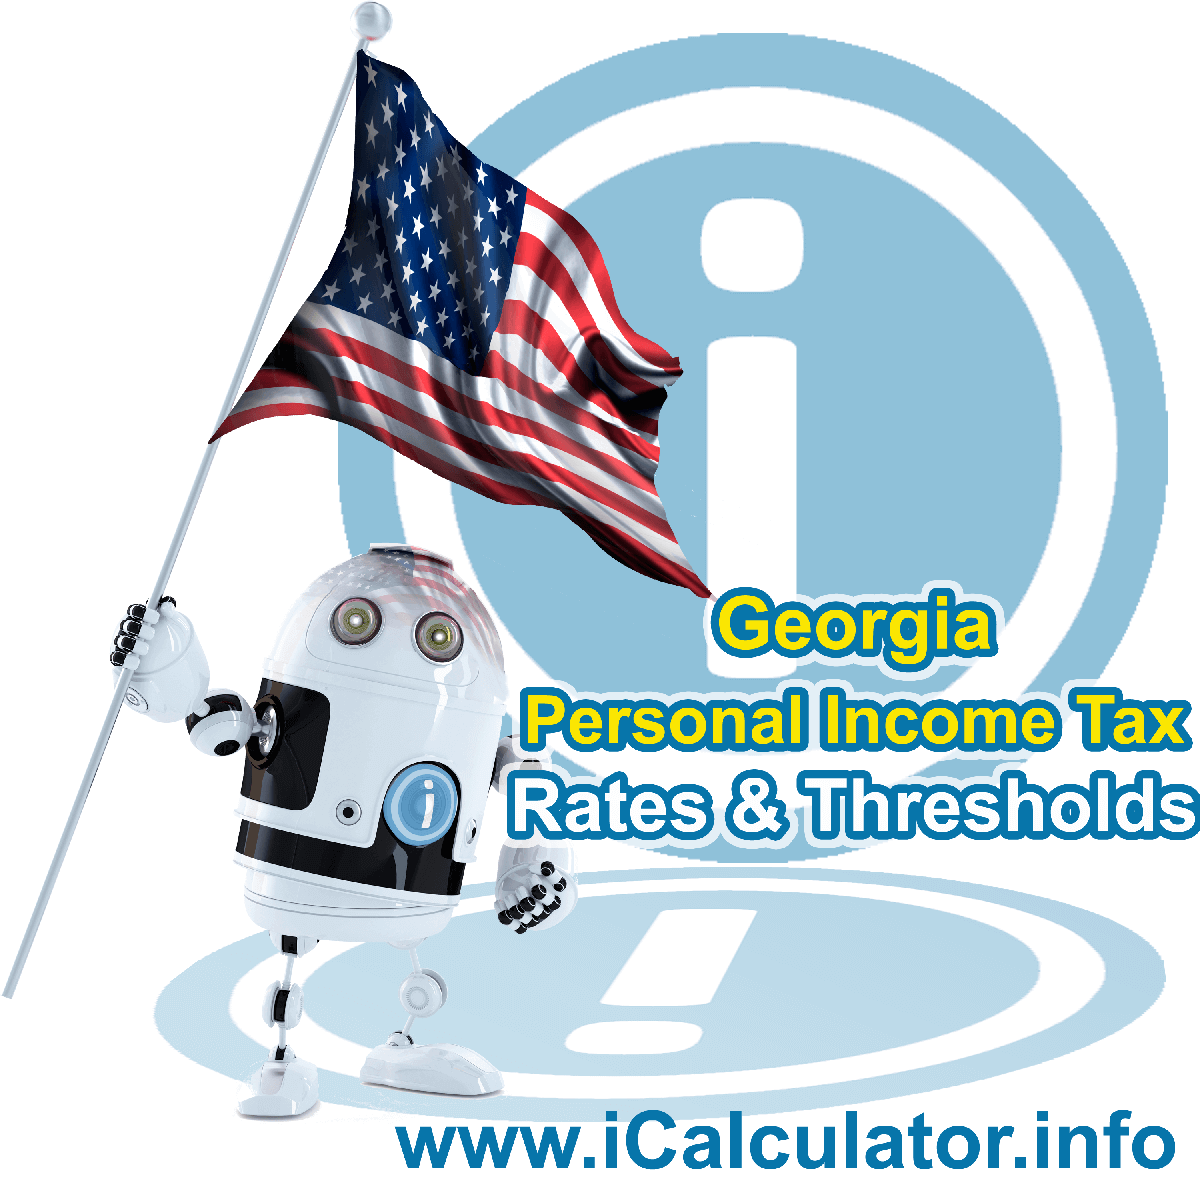 Georgia State Tax Tables 2022. This image displays details of the Georgia State Tax Tables for the 2022 tax return year which is provided in support of the 2022 US Tax Calculator